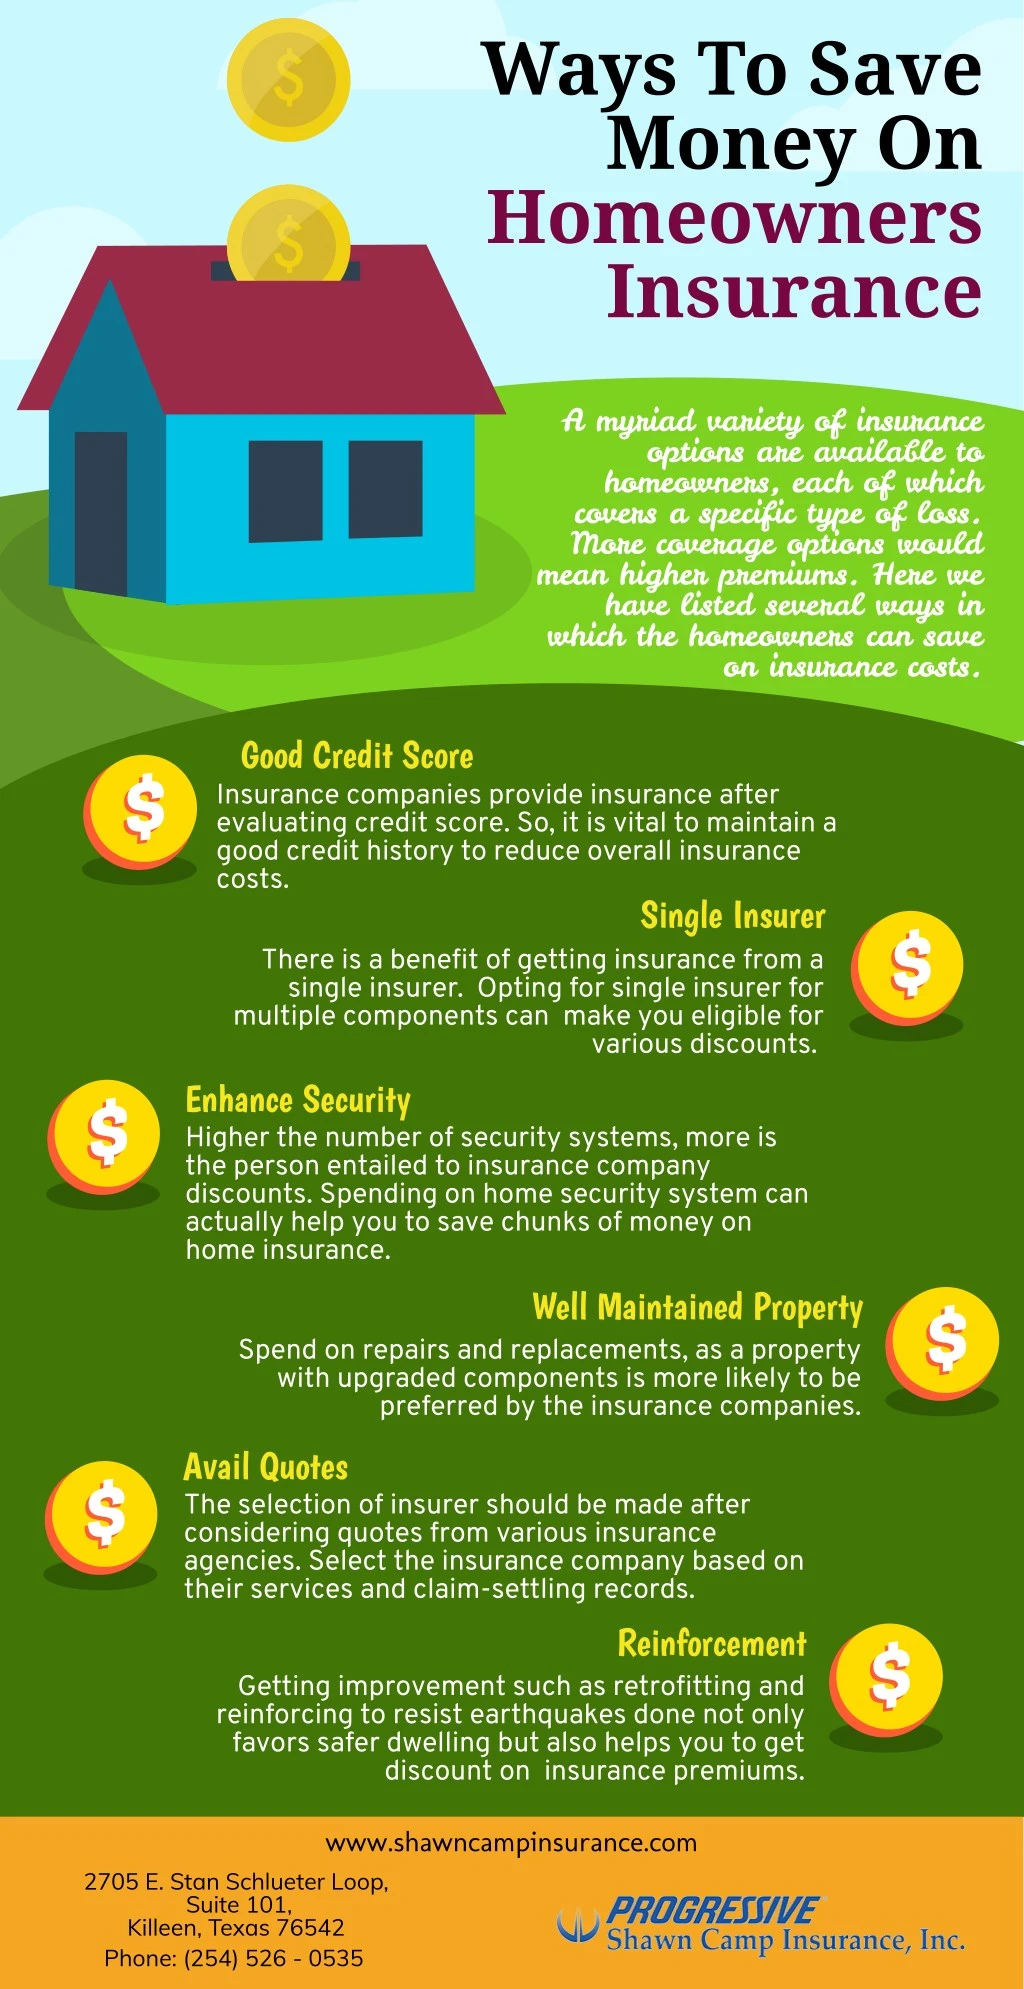 ways to save money on homeowners insurance